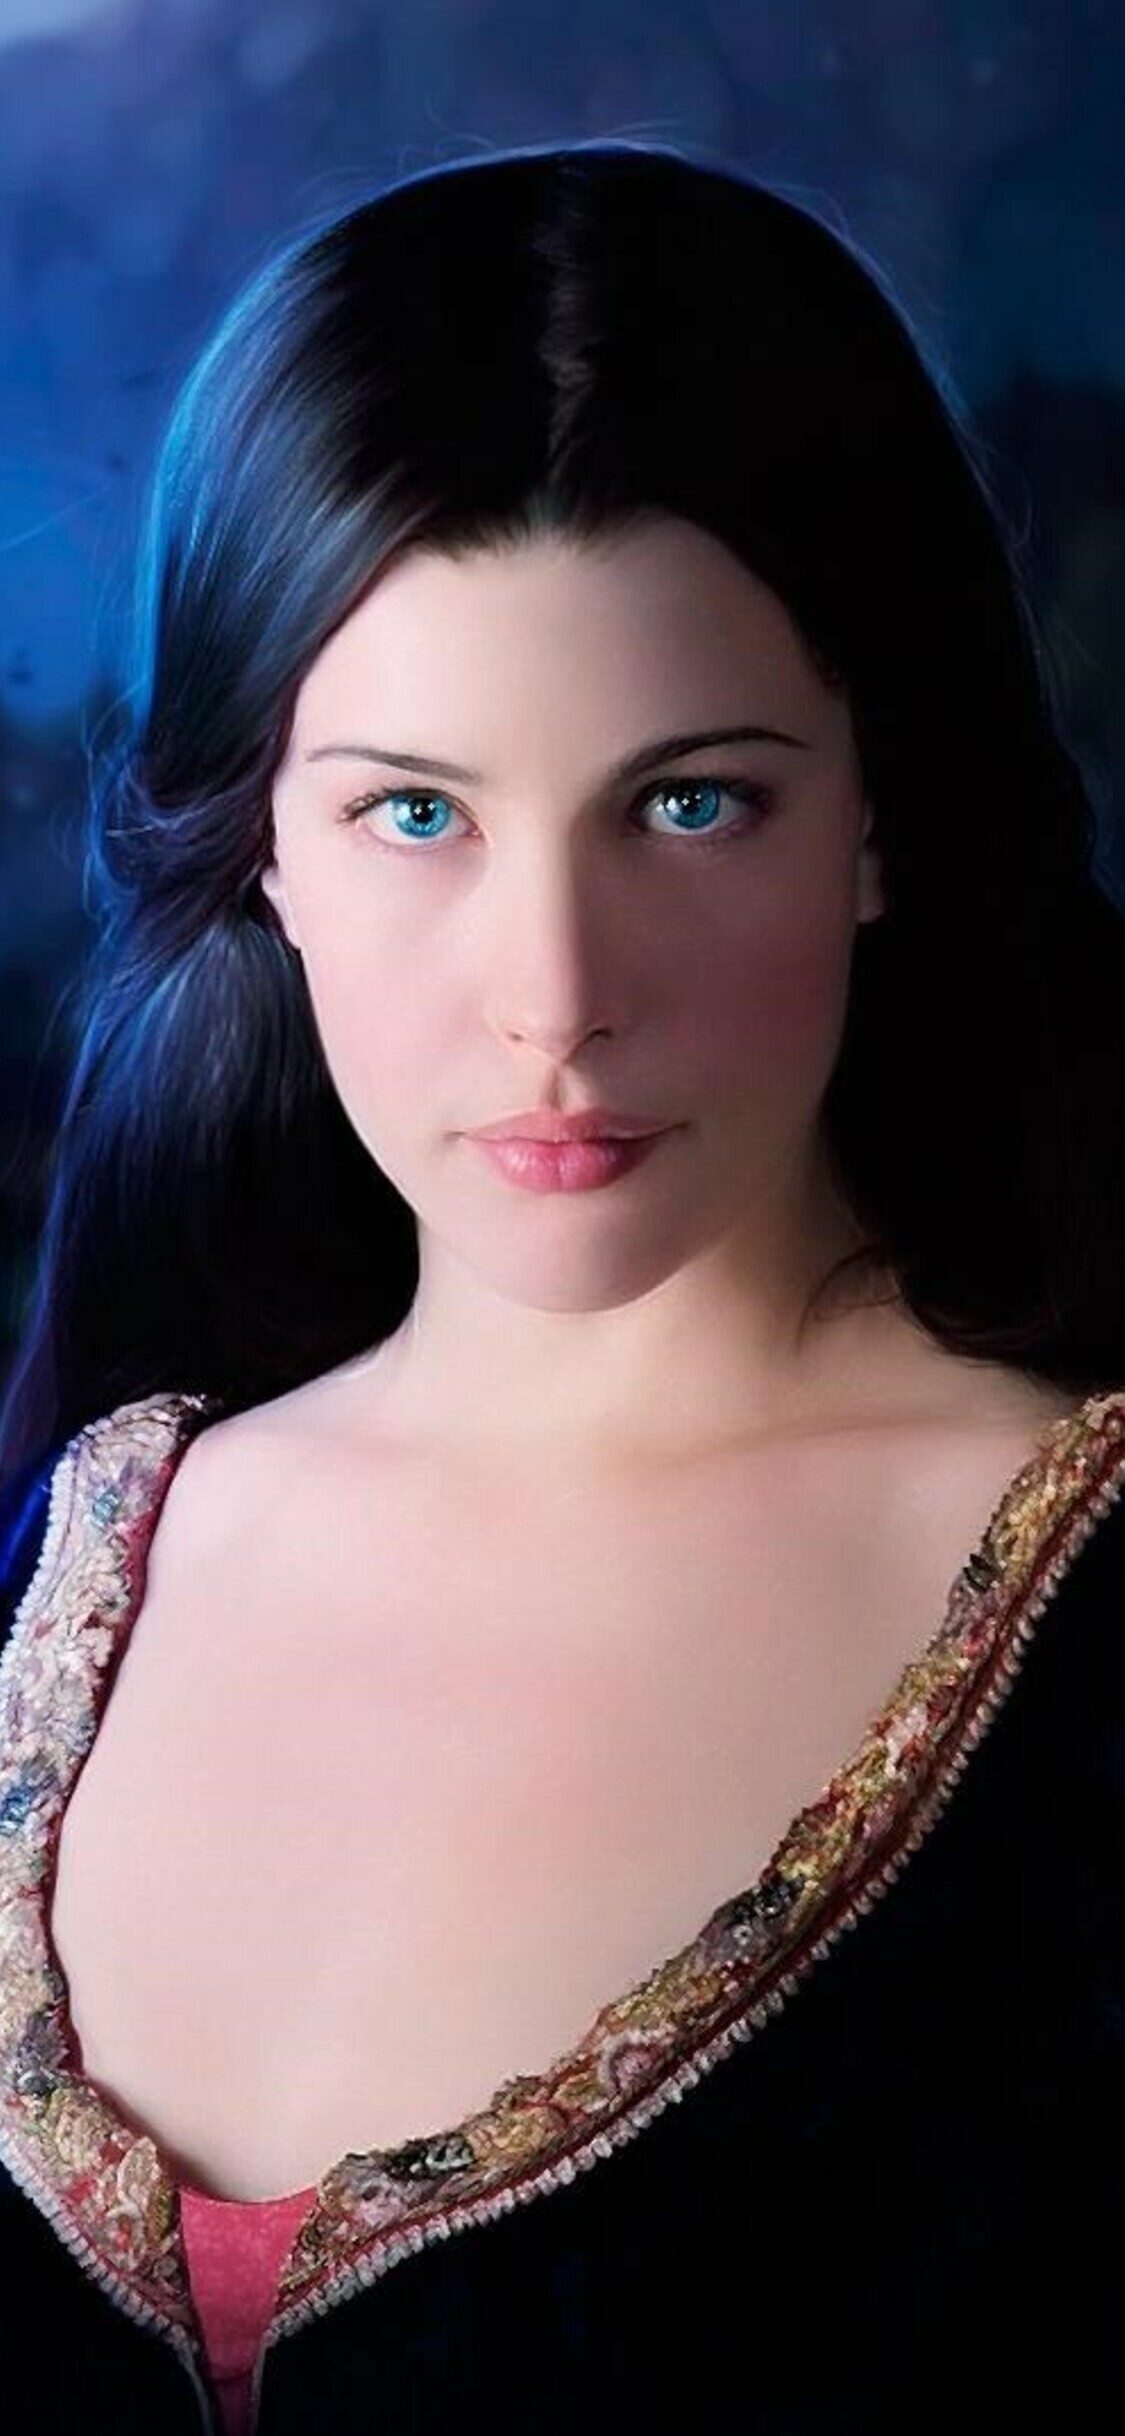 The Lord of the Rings: Peter Jackson's film adaptation, Arwen, played by Liv Tyler. 1130x2440 HD Wallpaper.